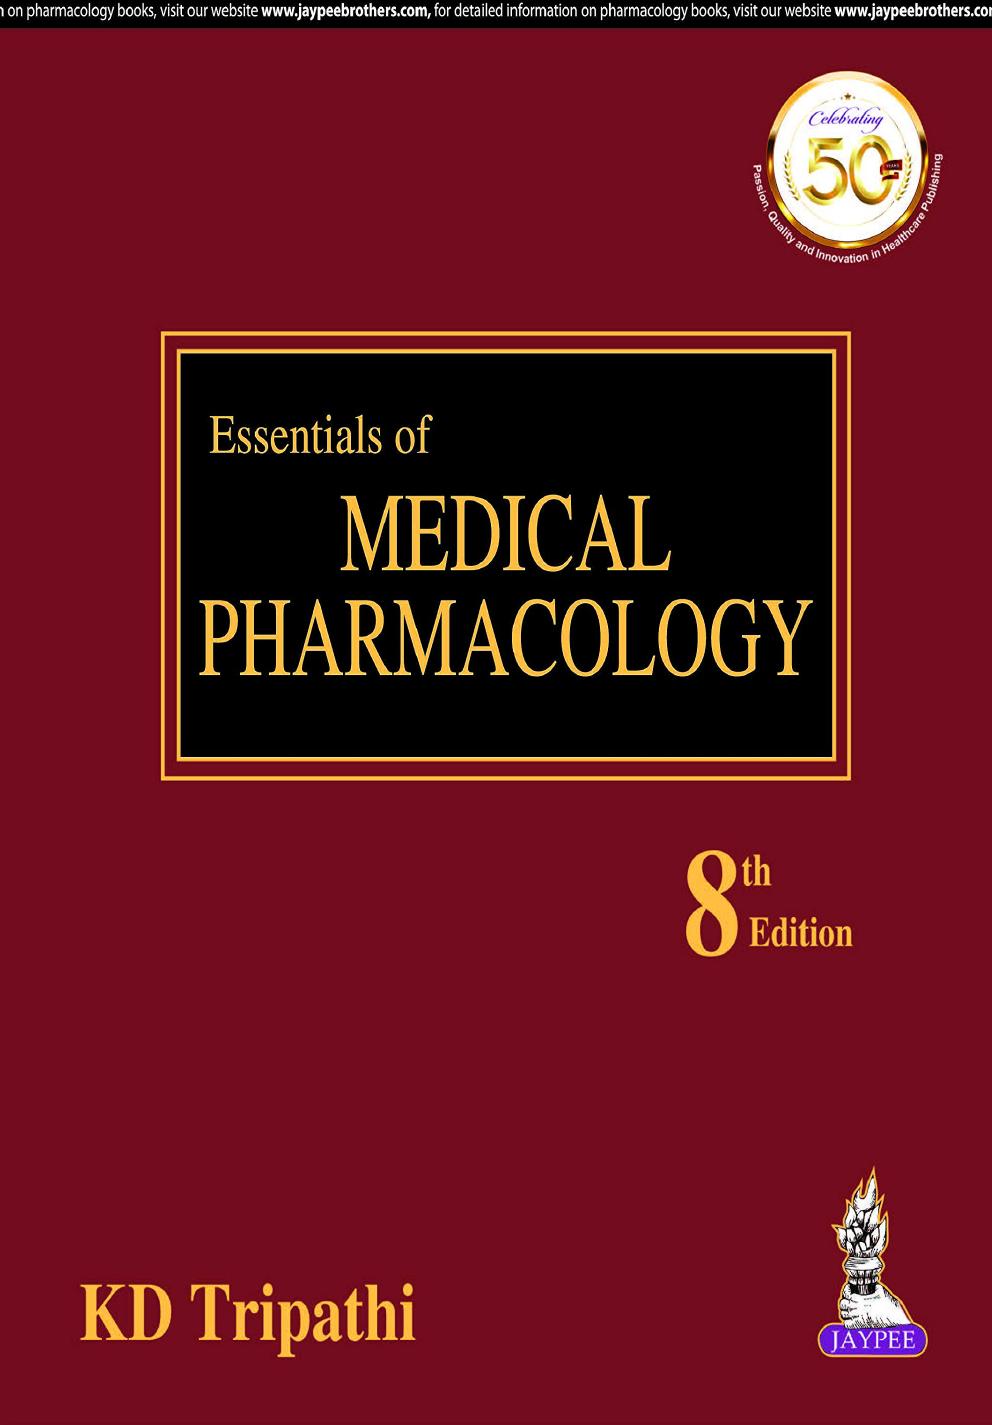 Essentials of Medical Pharmacology 2019